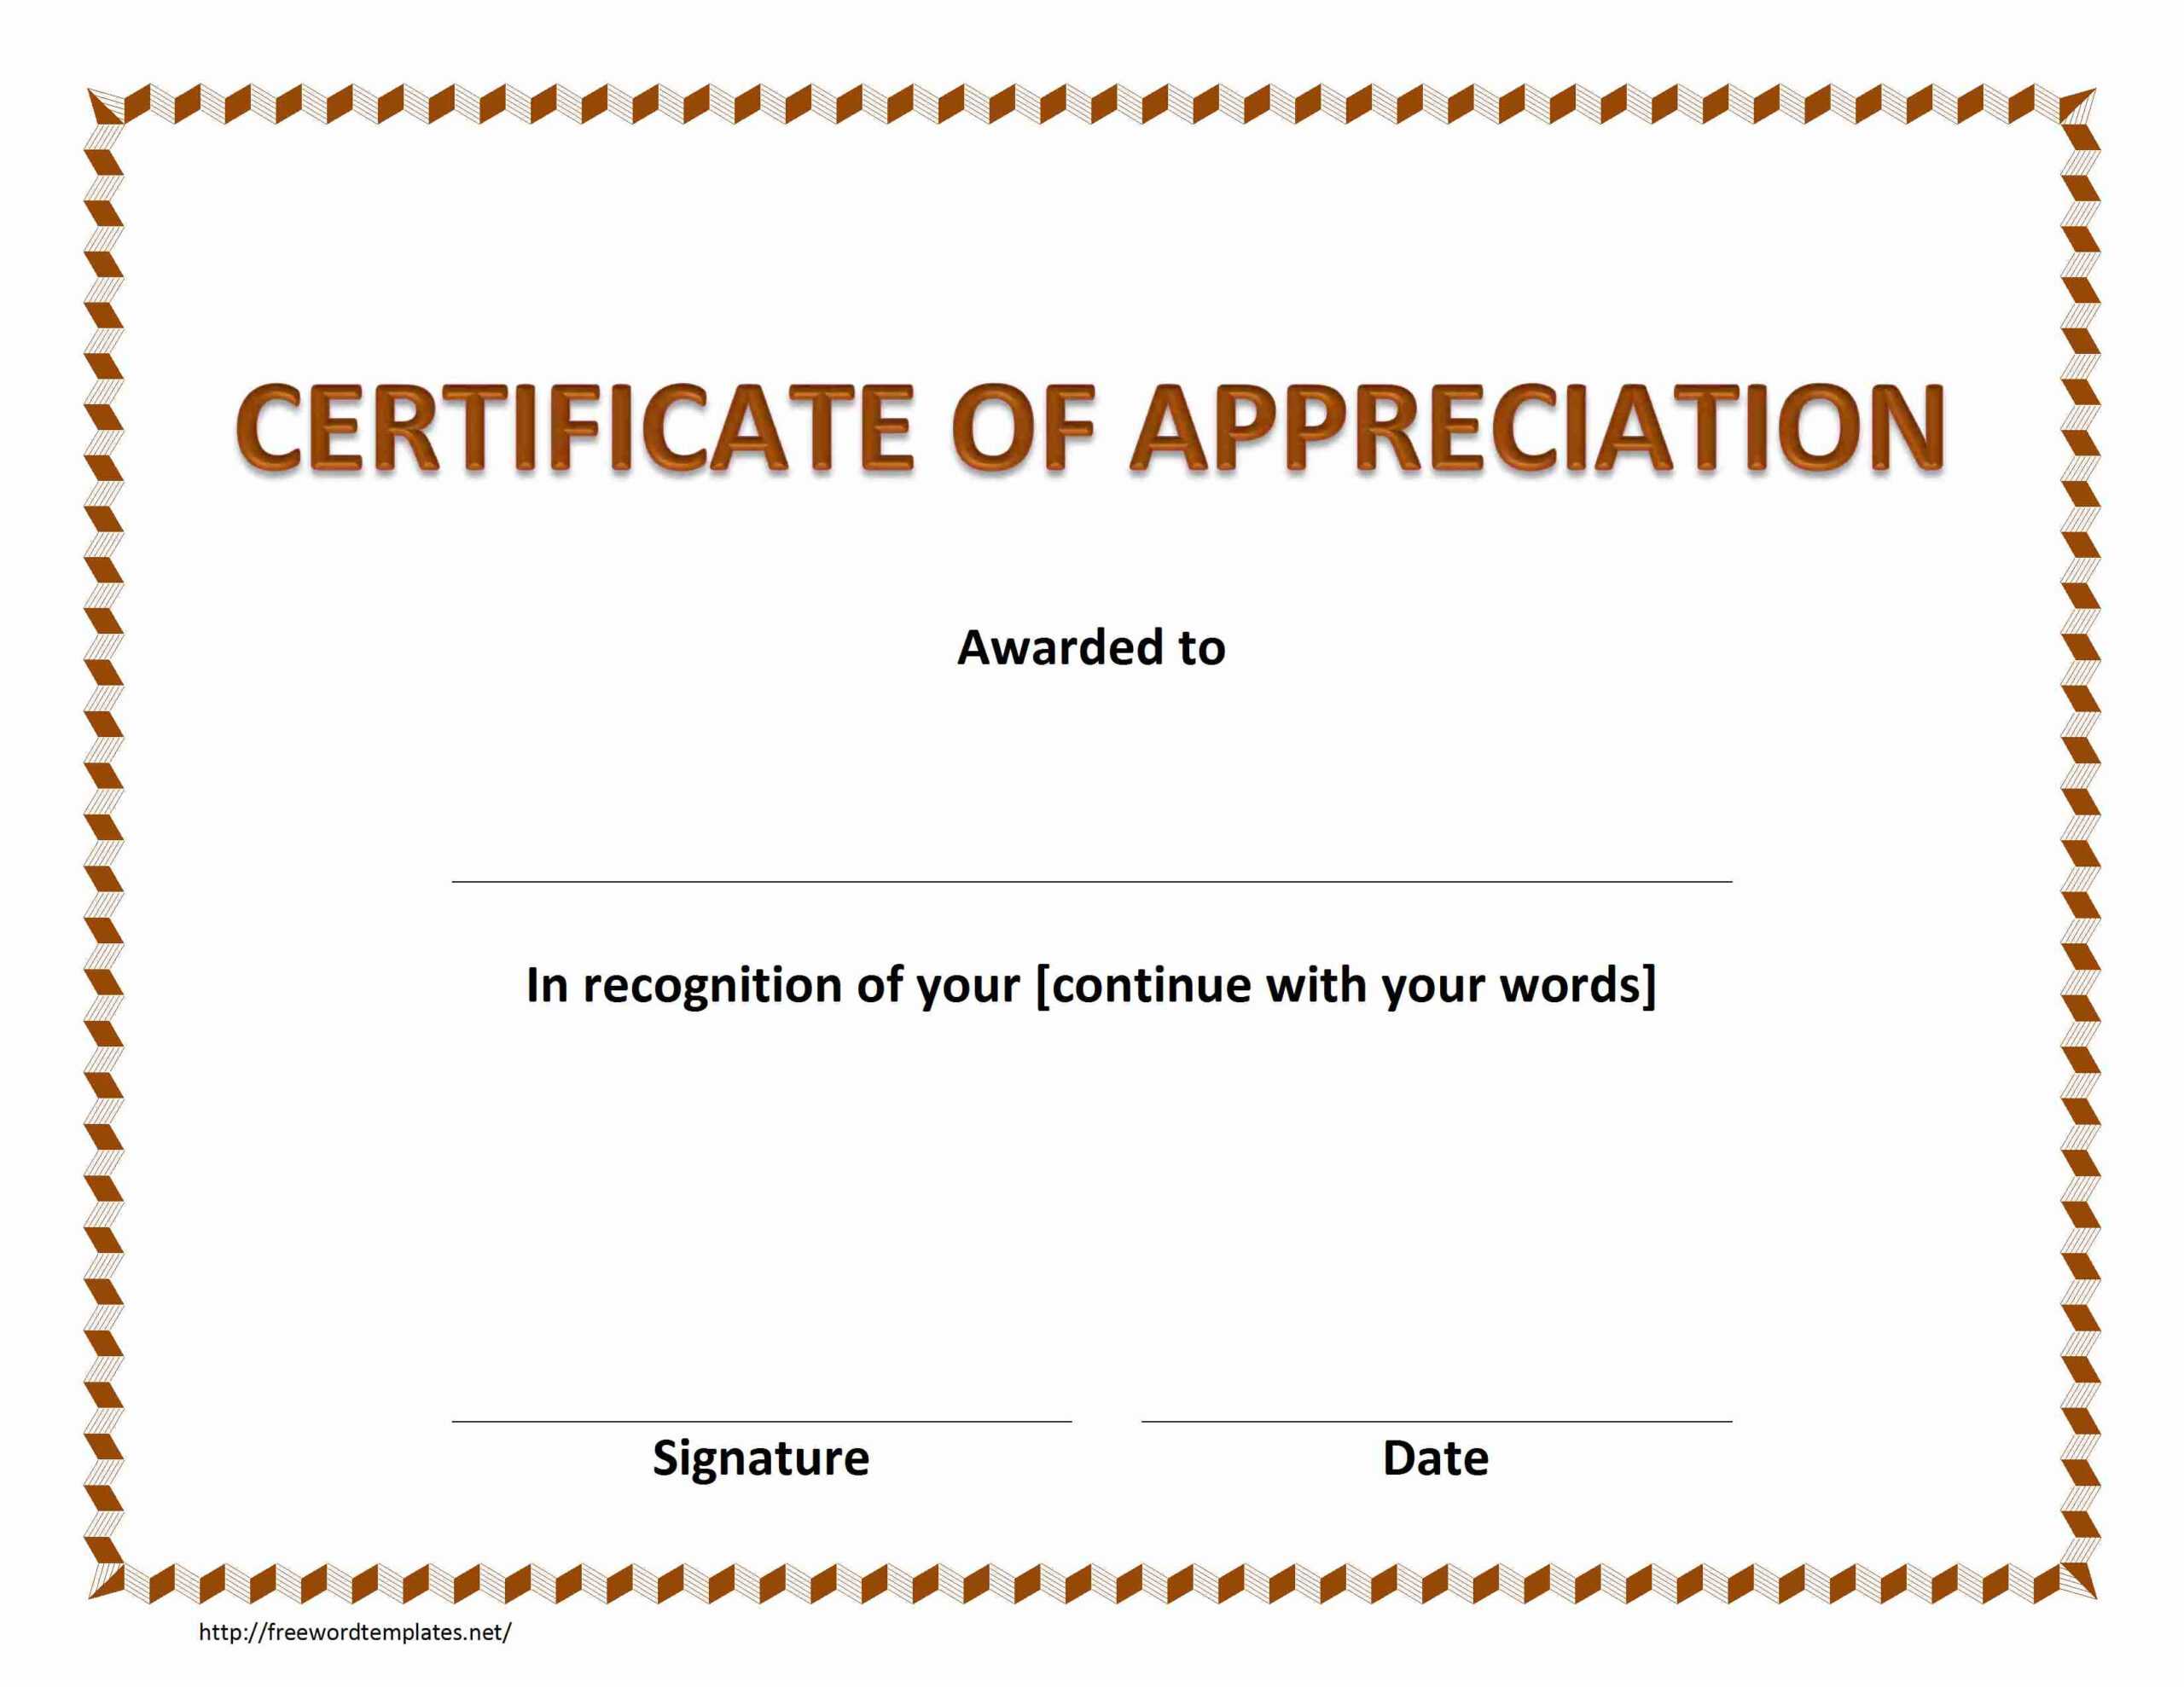 Certificate Of Appreciation Docs Intended For Certificate Of Appreciation Template Doc